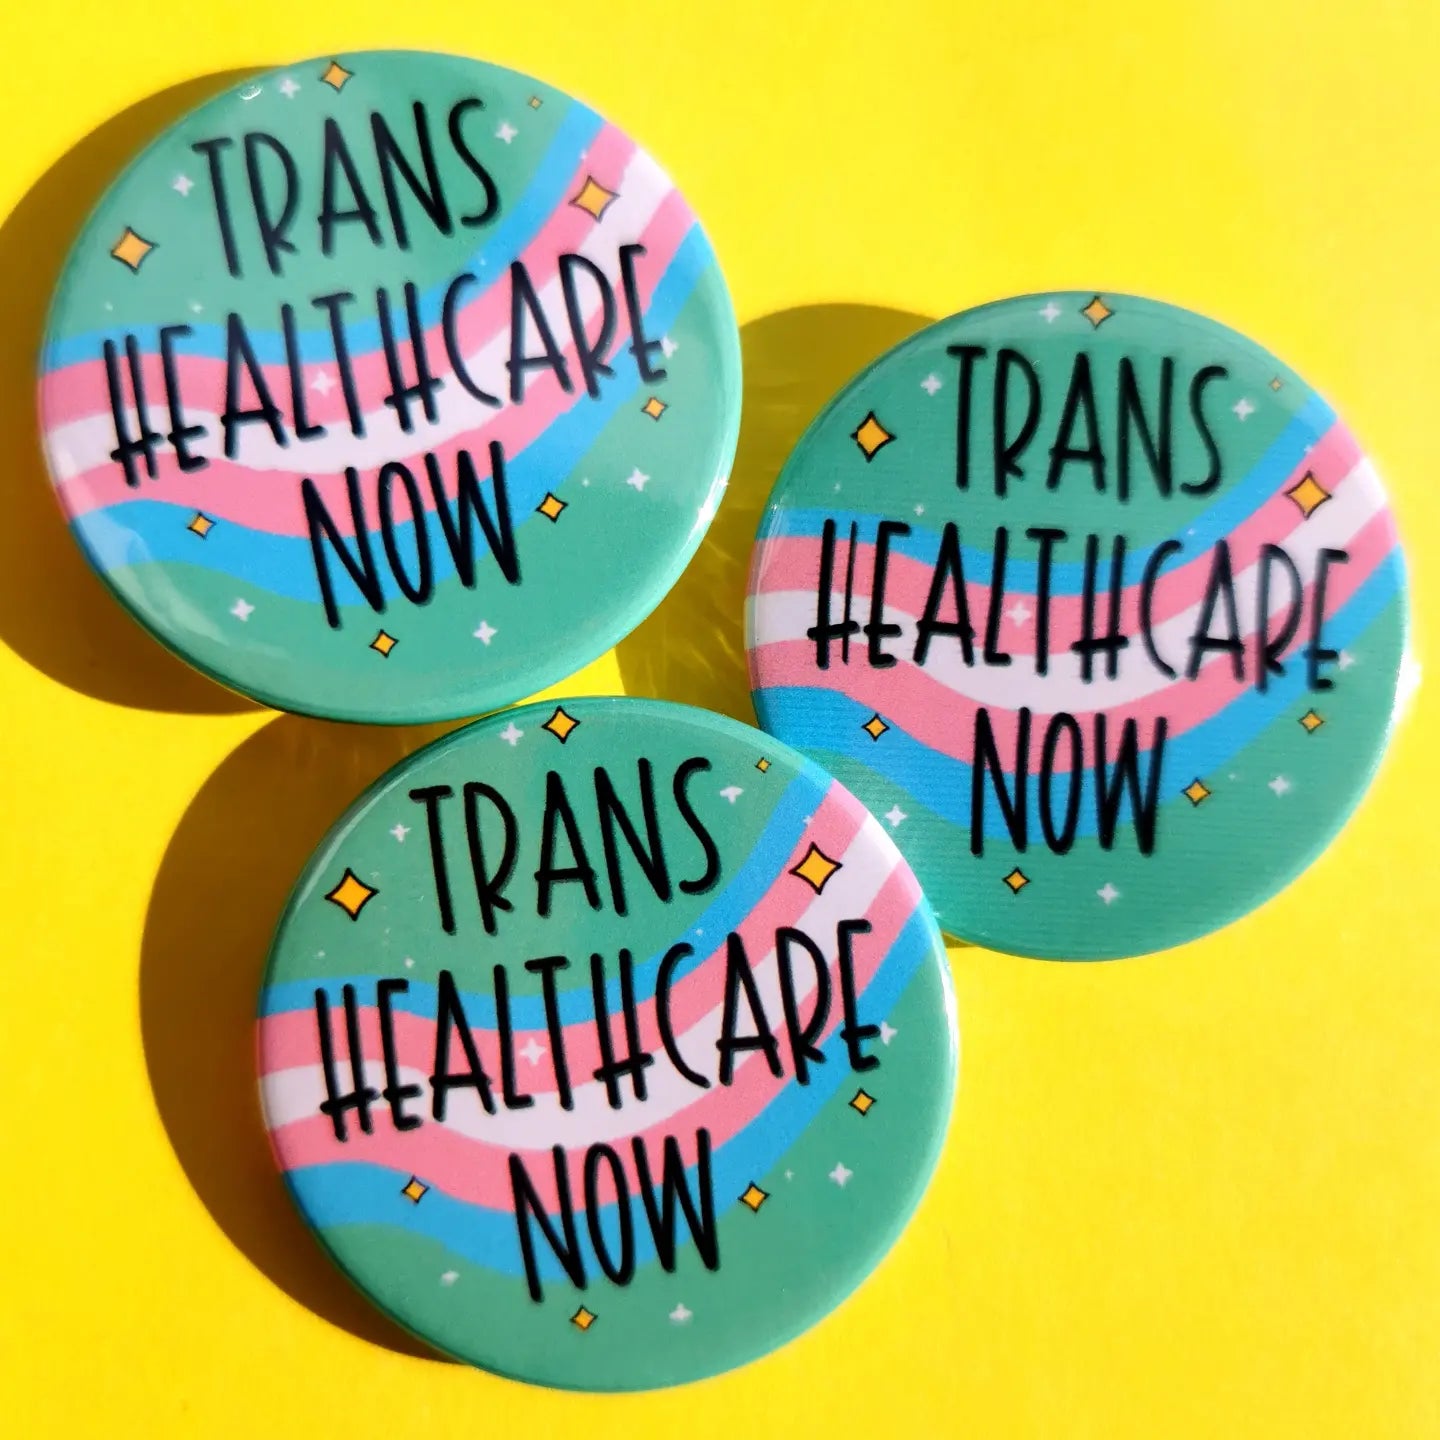 Trans Healthcare Now badge